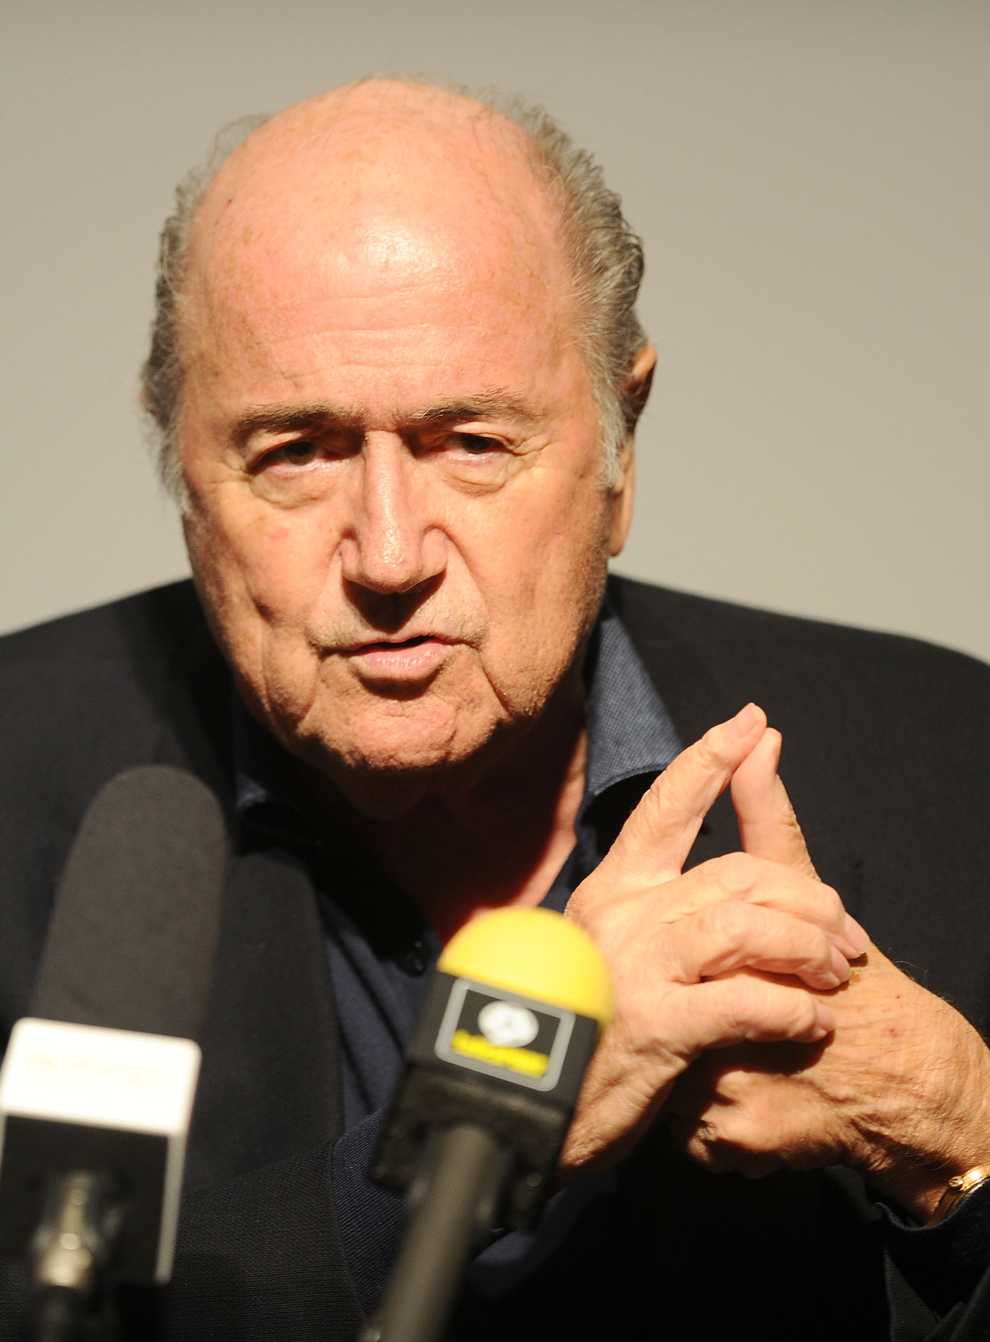 FIFA president Sepp Blatter has been issued with a new ban from football